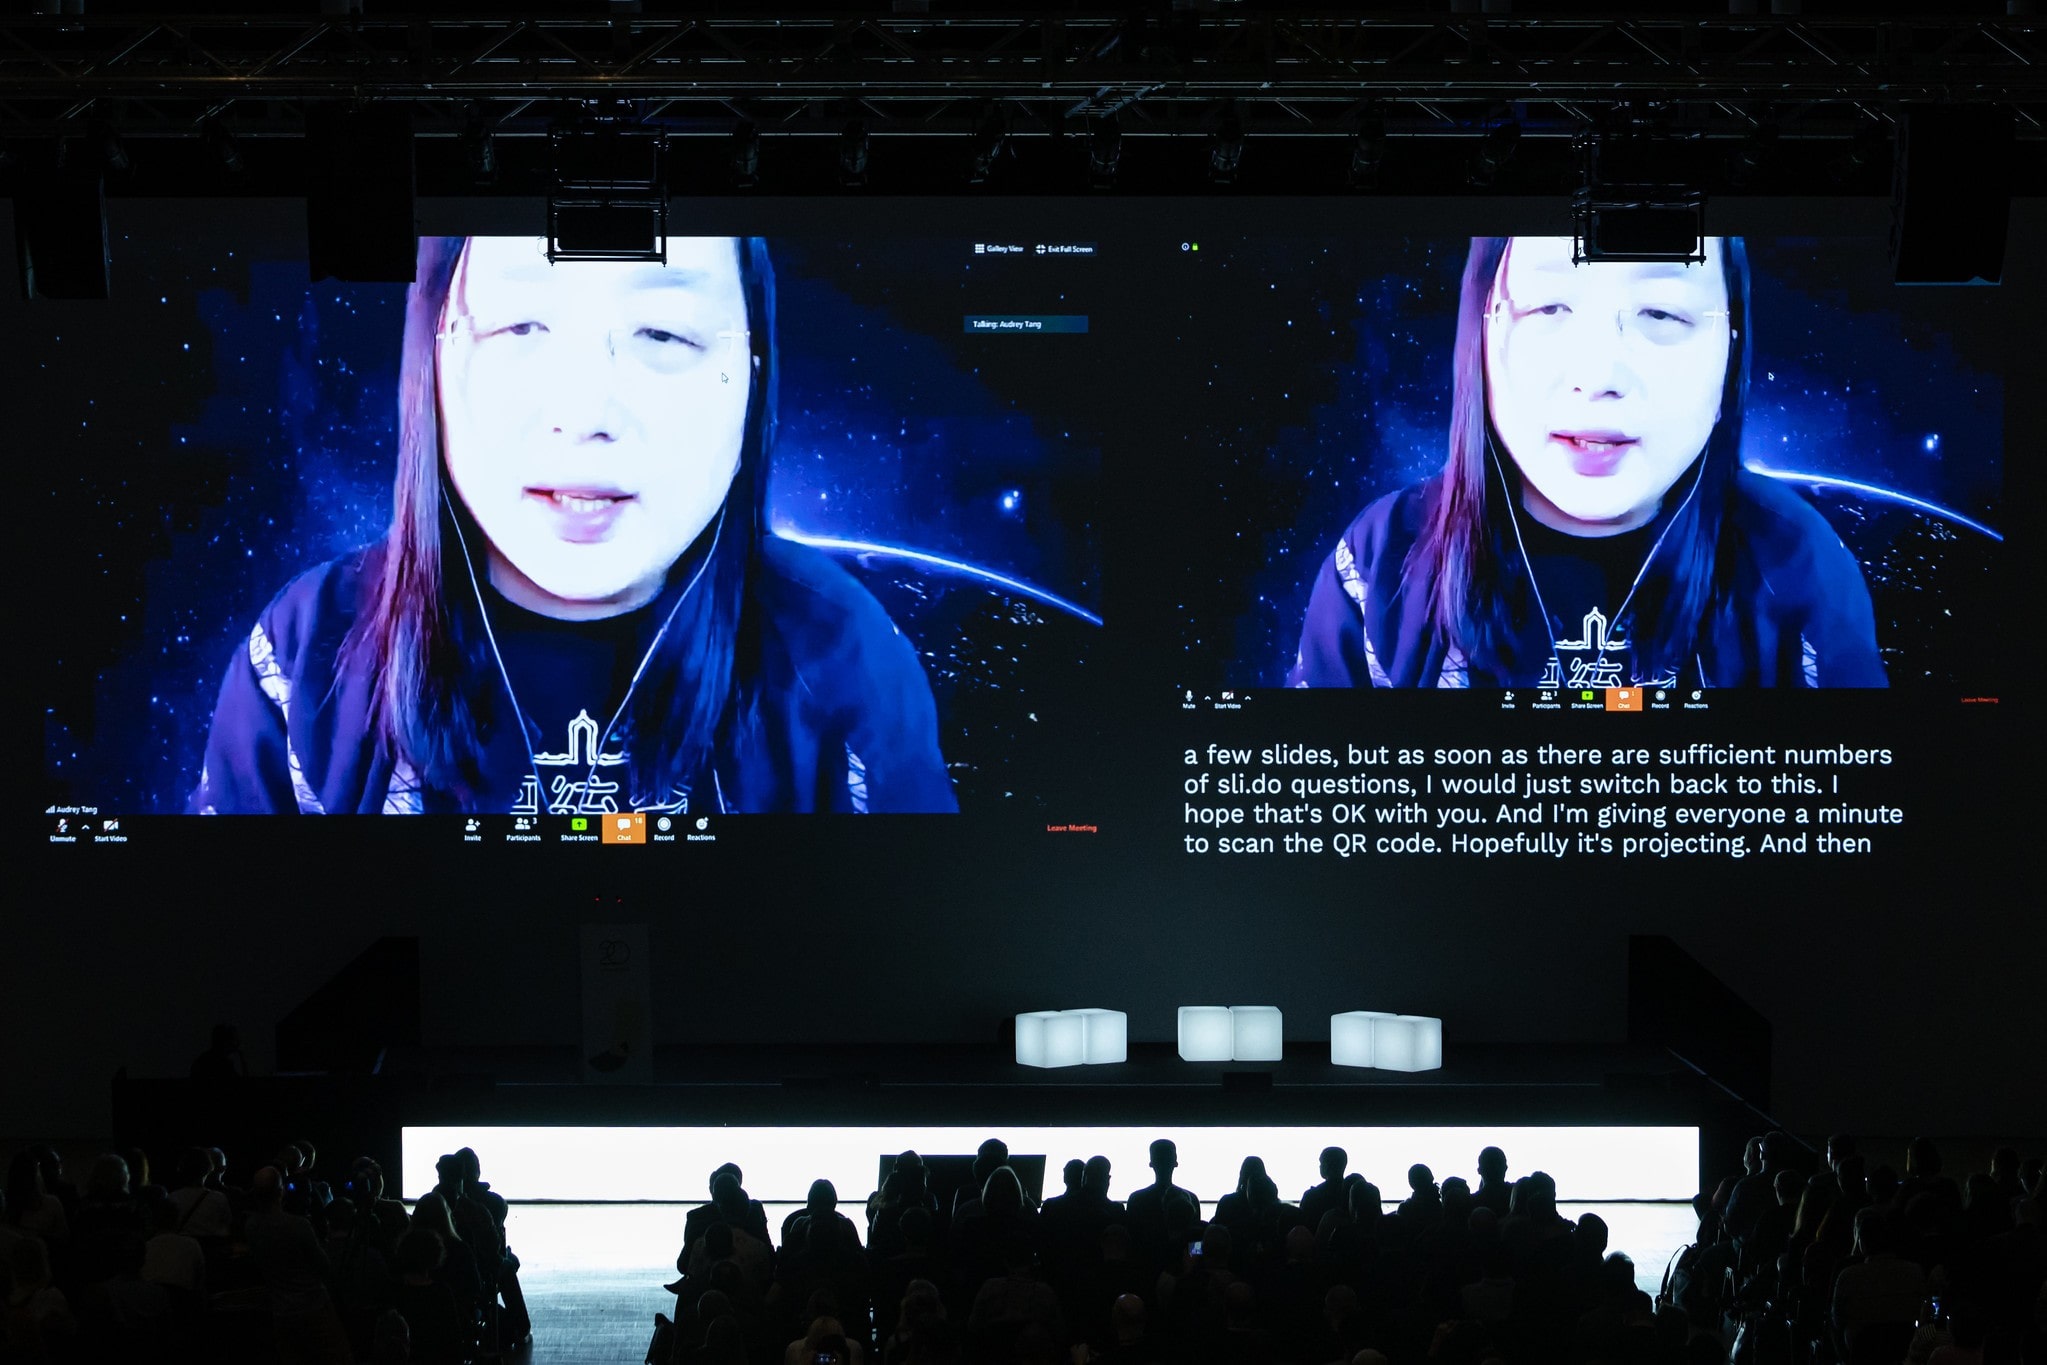 Audrey Tang on stage via video link